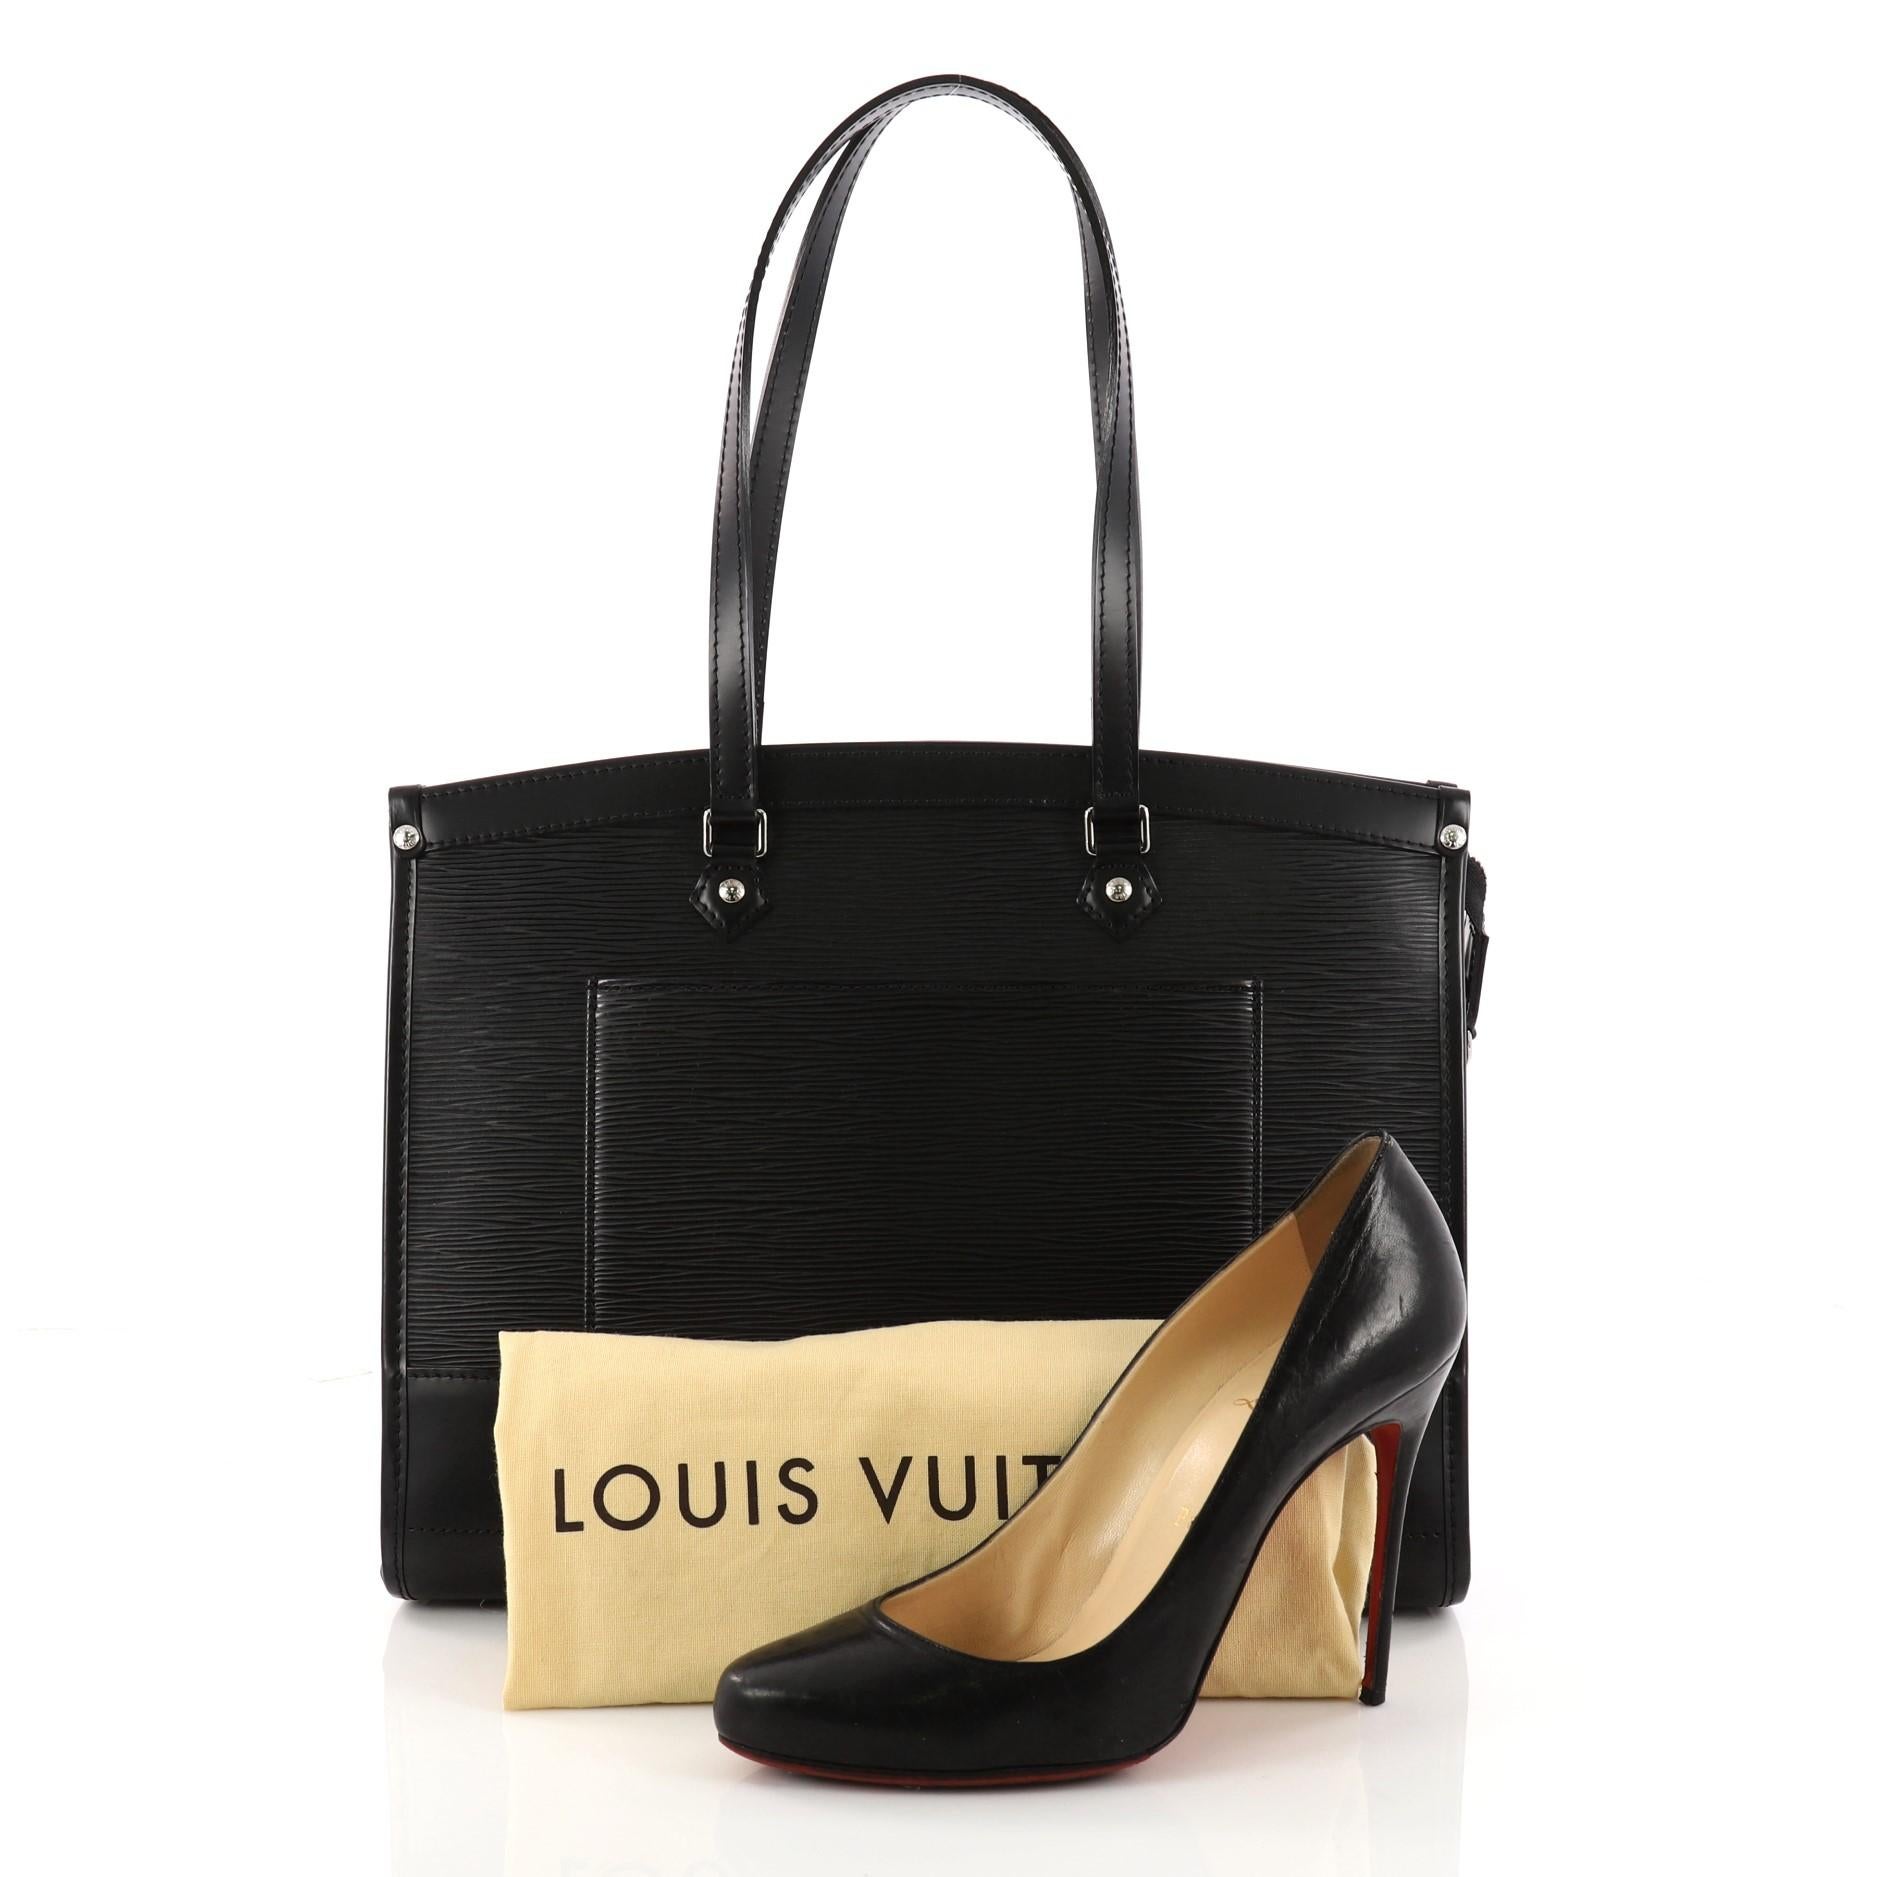 This authentic Louis Vuitton Madeleine Handbag Epi Leather GM named after the Parisian church, Place de la Madeleine is a perfectly elegant bag for day or night out. Crafted from black epi leather, this chic tote features dual-flat leather handles,